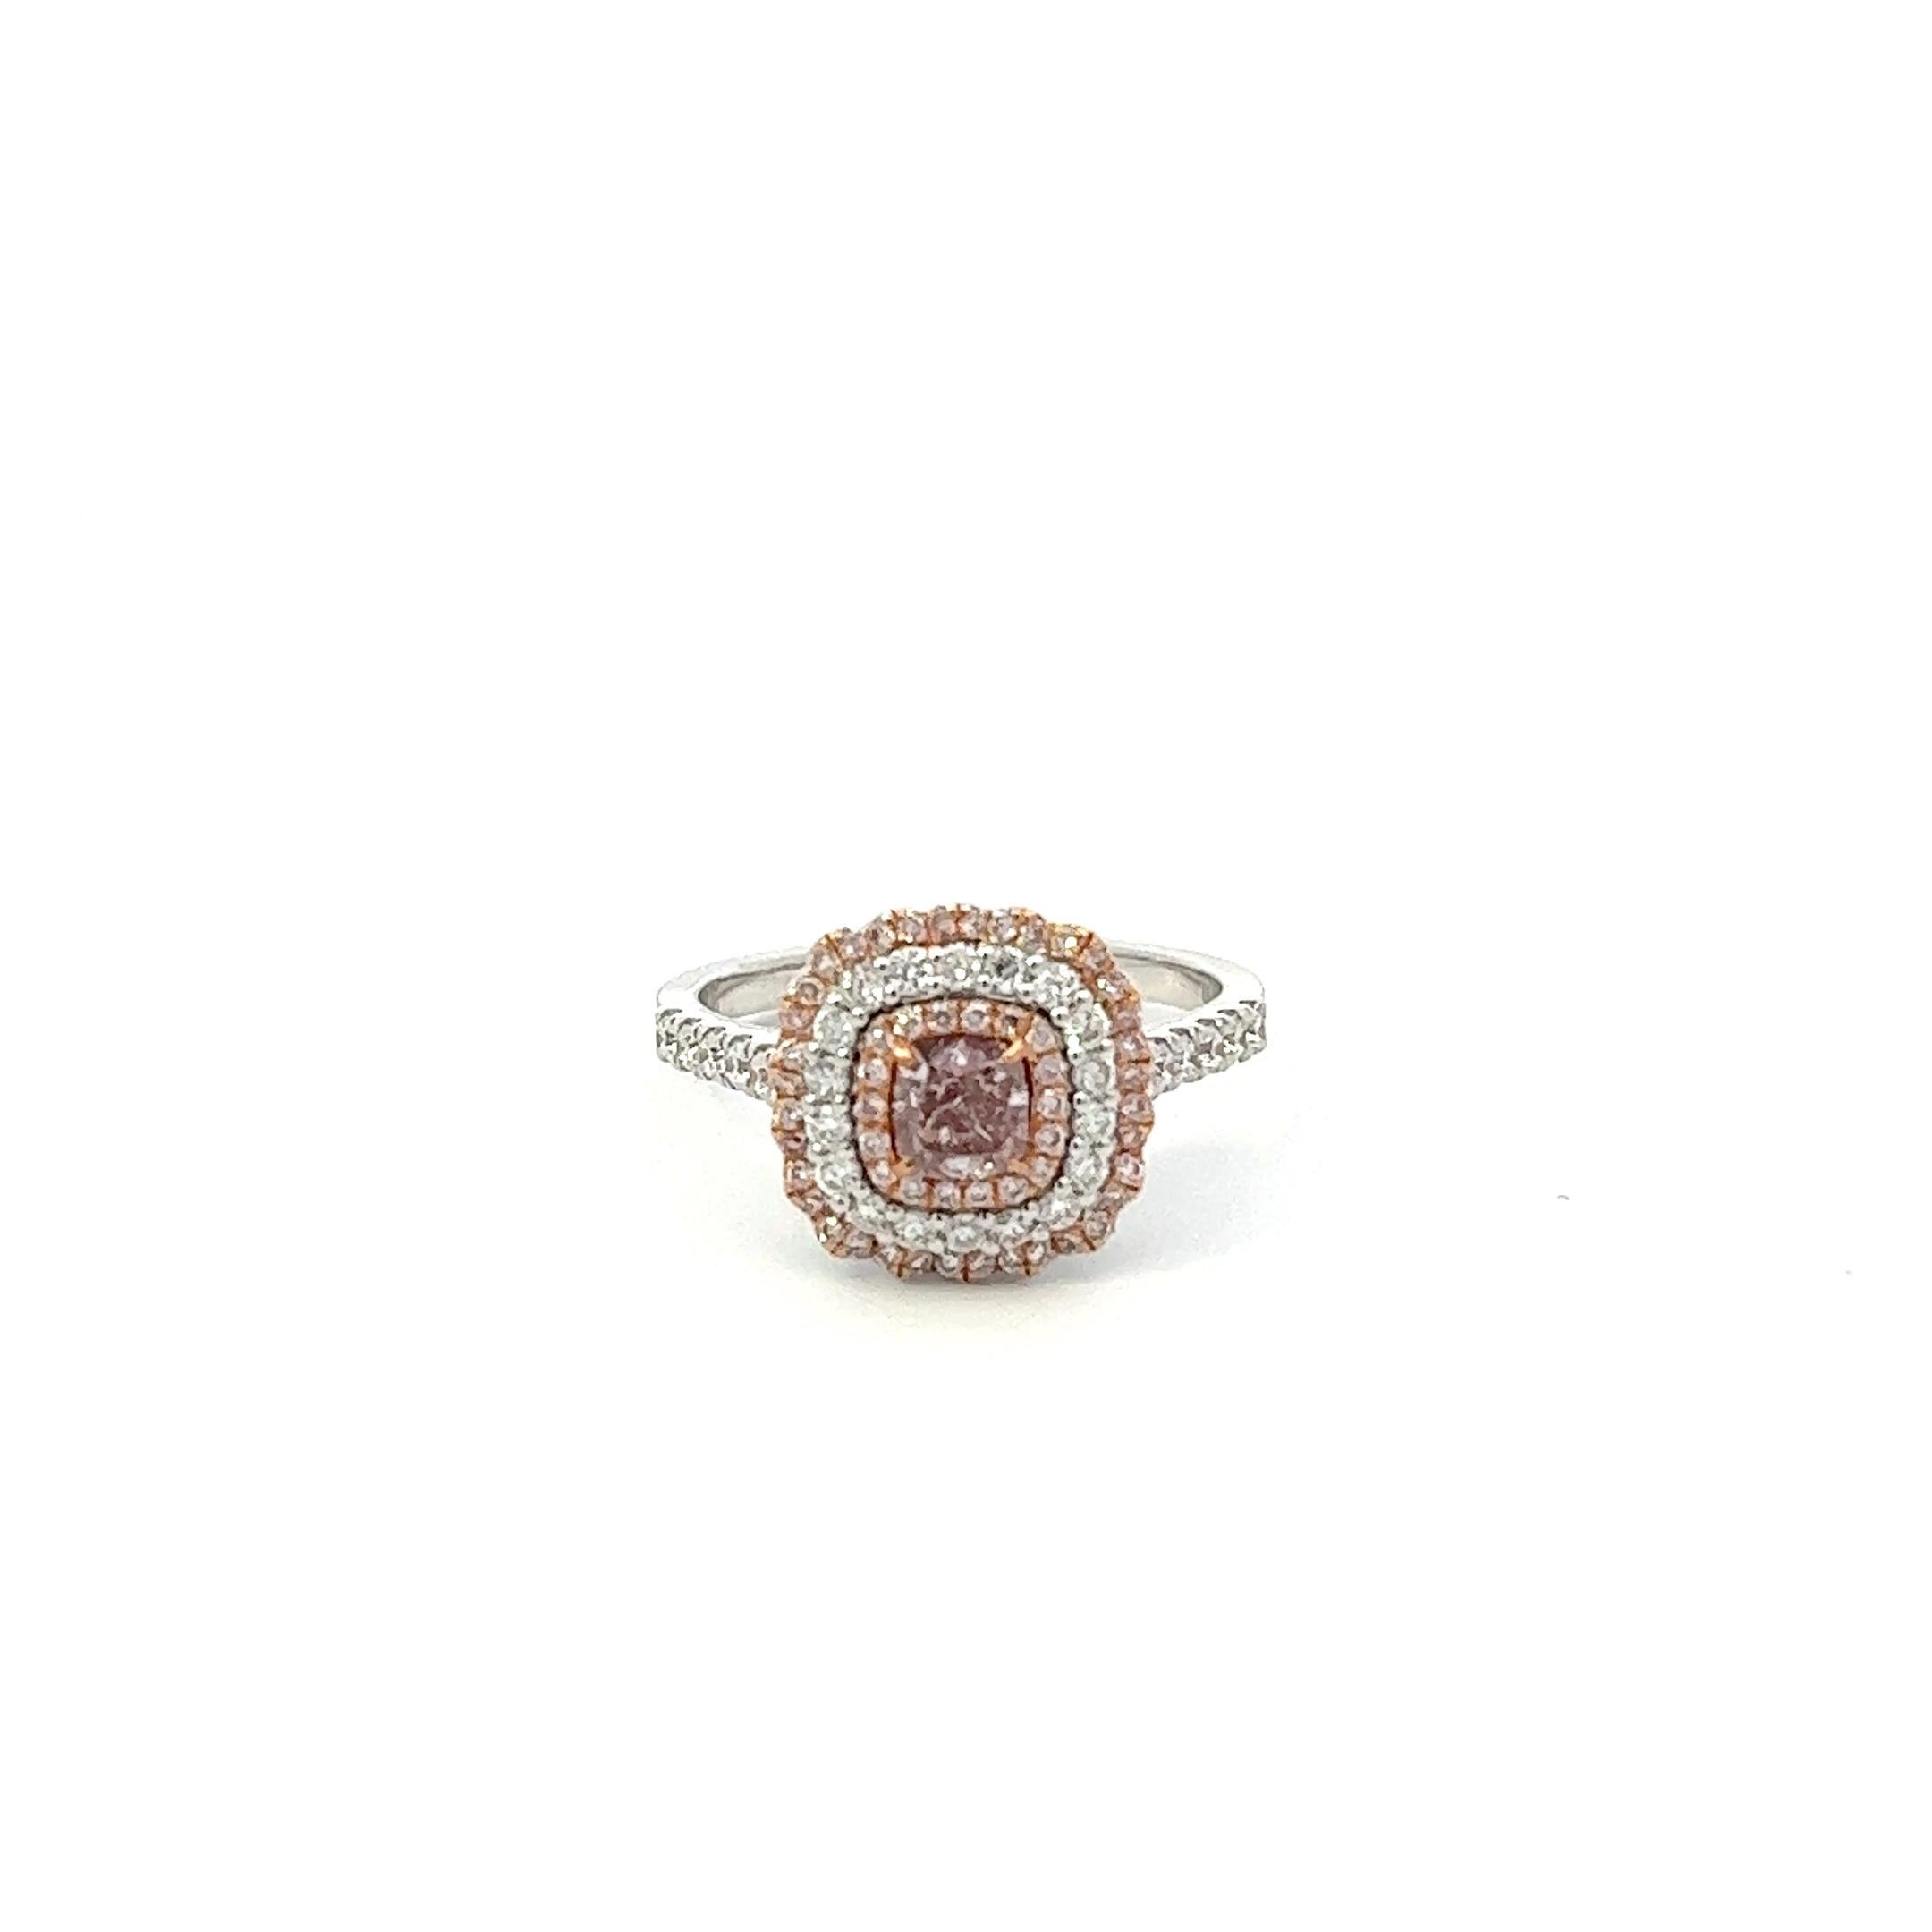 Center: 0.50ct Fancy Brownish Pink Cushion I2 GIA# 2407850499
Setting: 18k White Gold 0.60ctw Pink and White Diamonds

An extremely rare and stunning natural pink diamond center. Pink Diamonds account for less than 0.01% of all diamonds mined in the